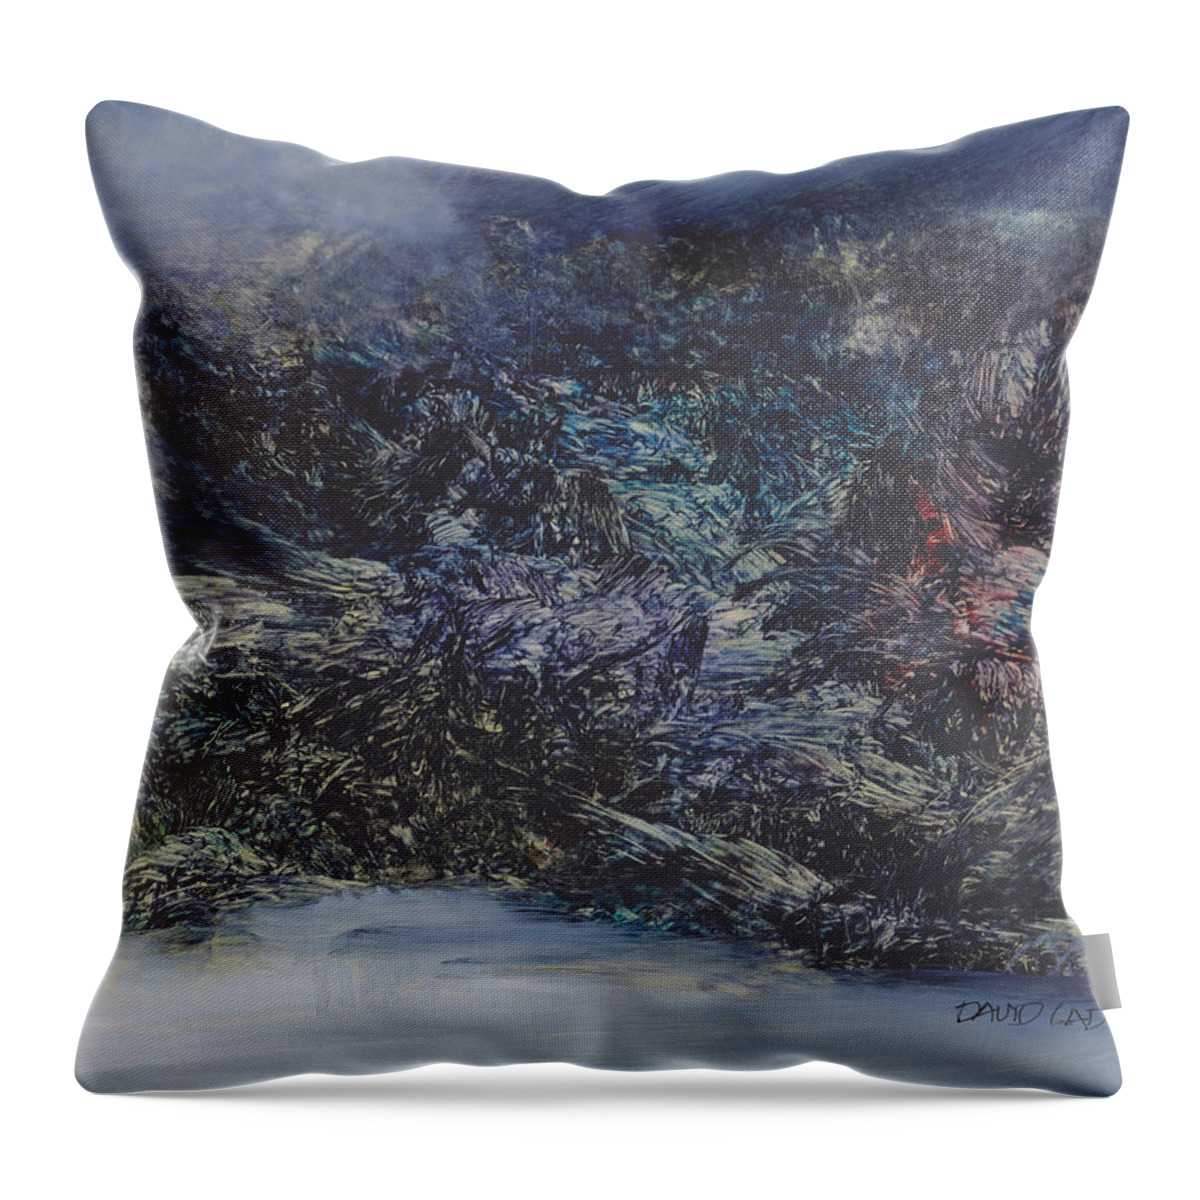 Elemental Throw Pillow featuring the painting Elemental 59 by David Ladmore